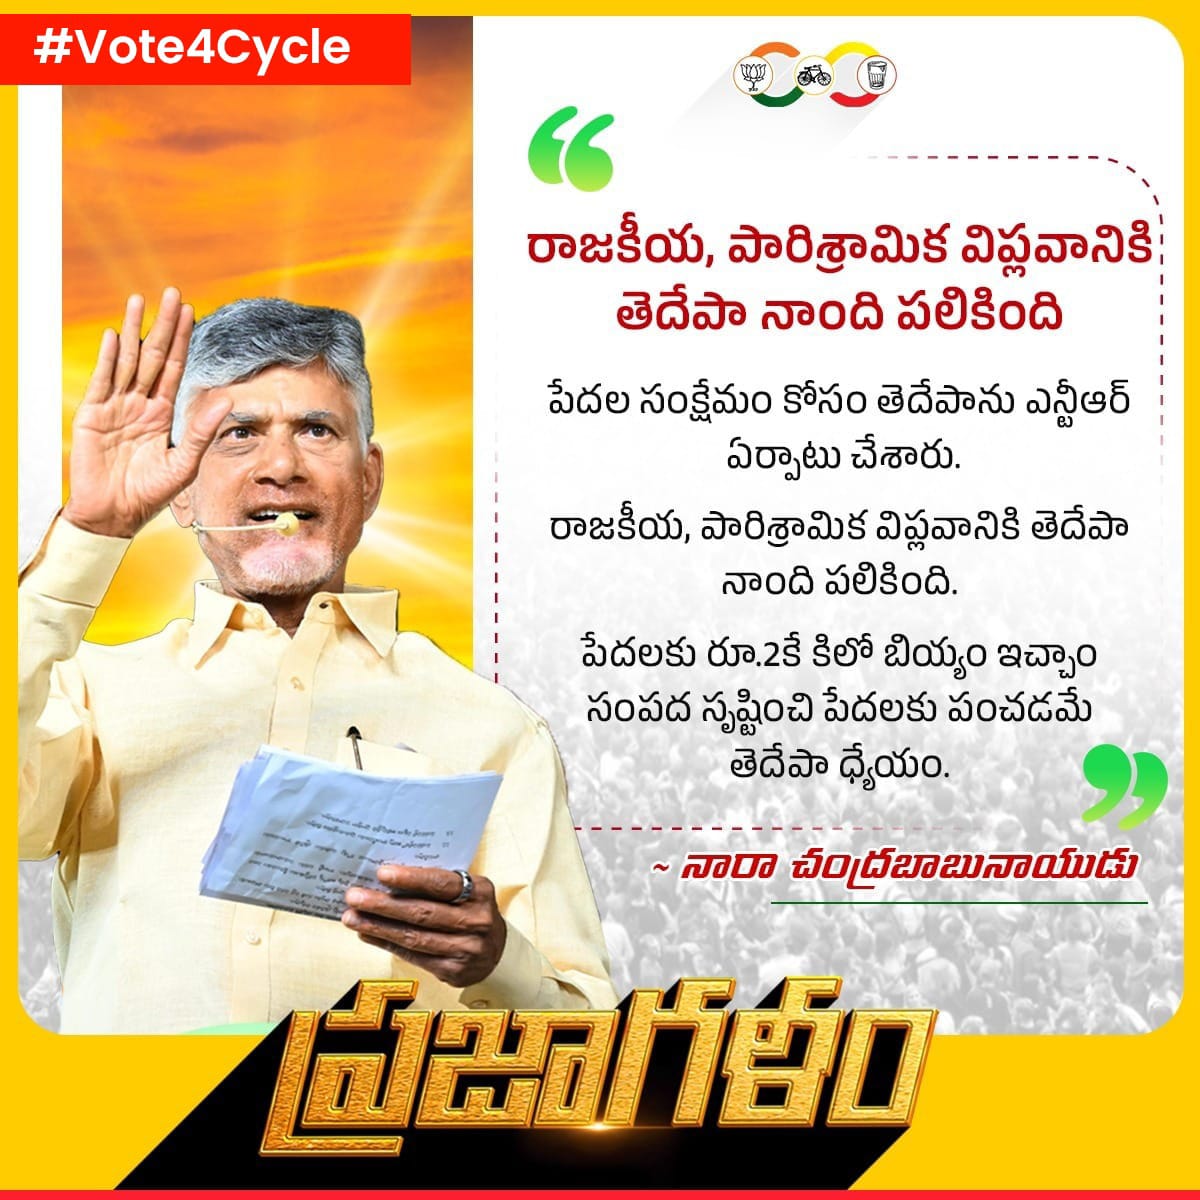 Naidu's holistic approach to skill development encompassed not only technical skills but also financial literacy and entrepreneurship training, fostering a culture of self-reliance.#TDPJSPBJPWinningAP